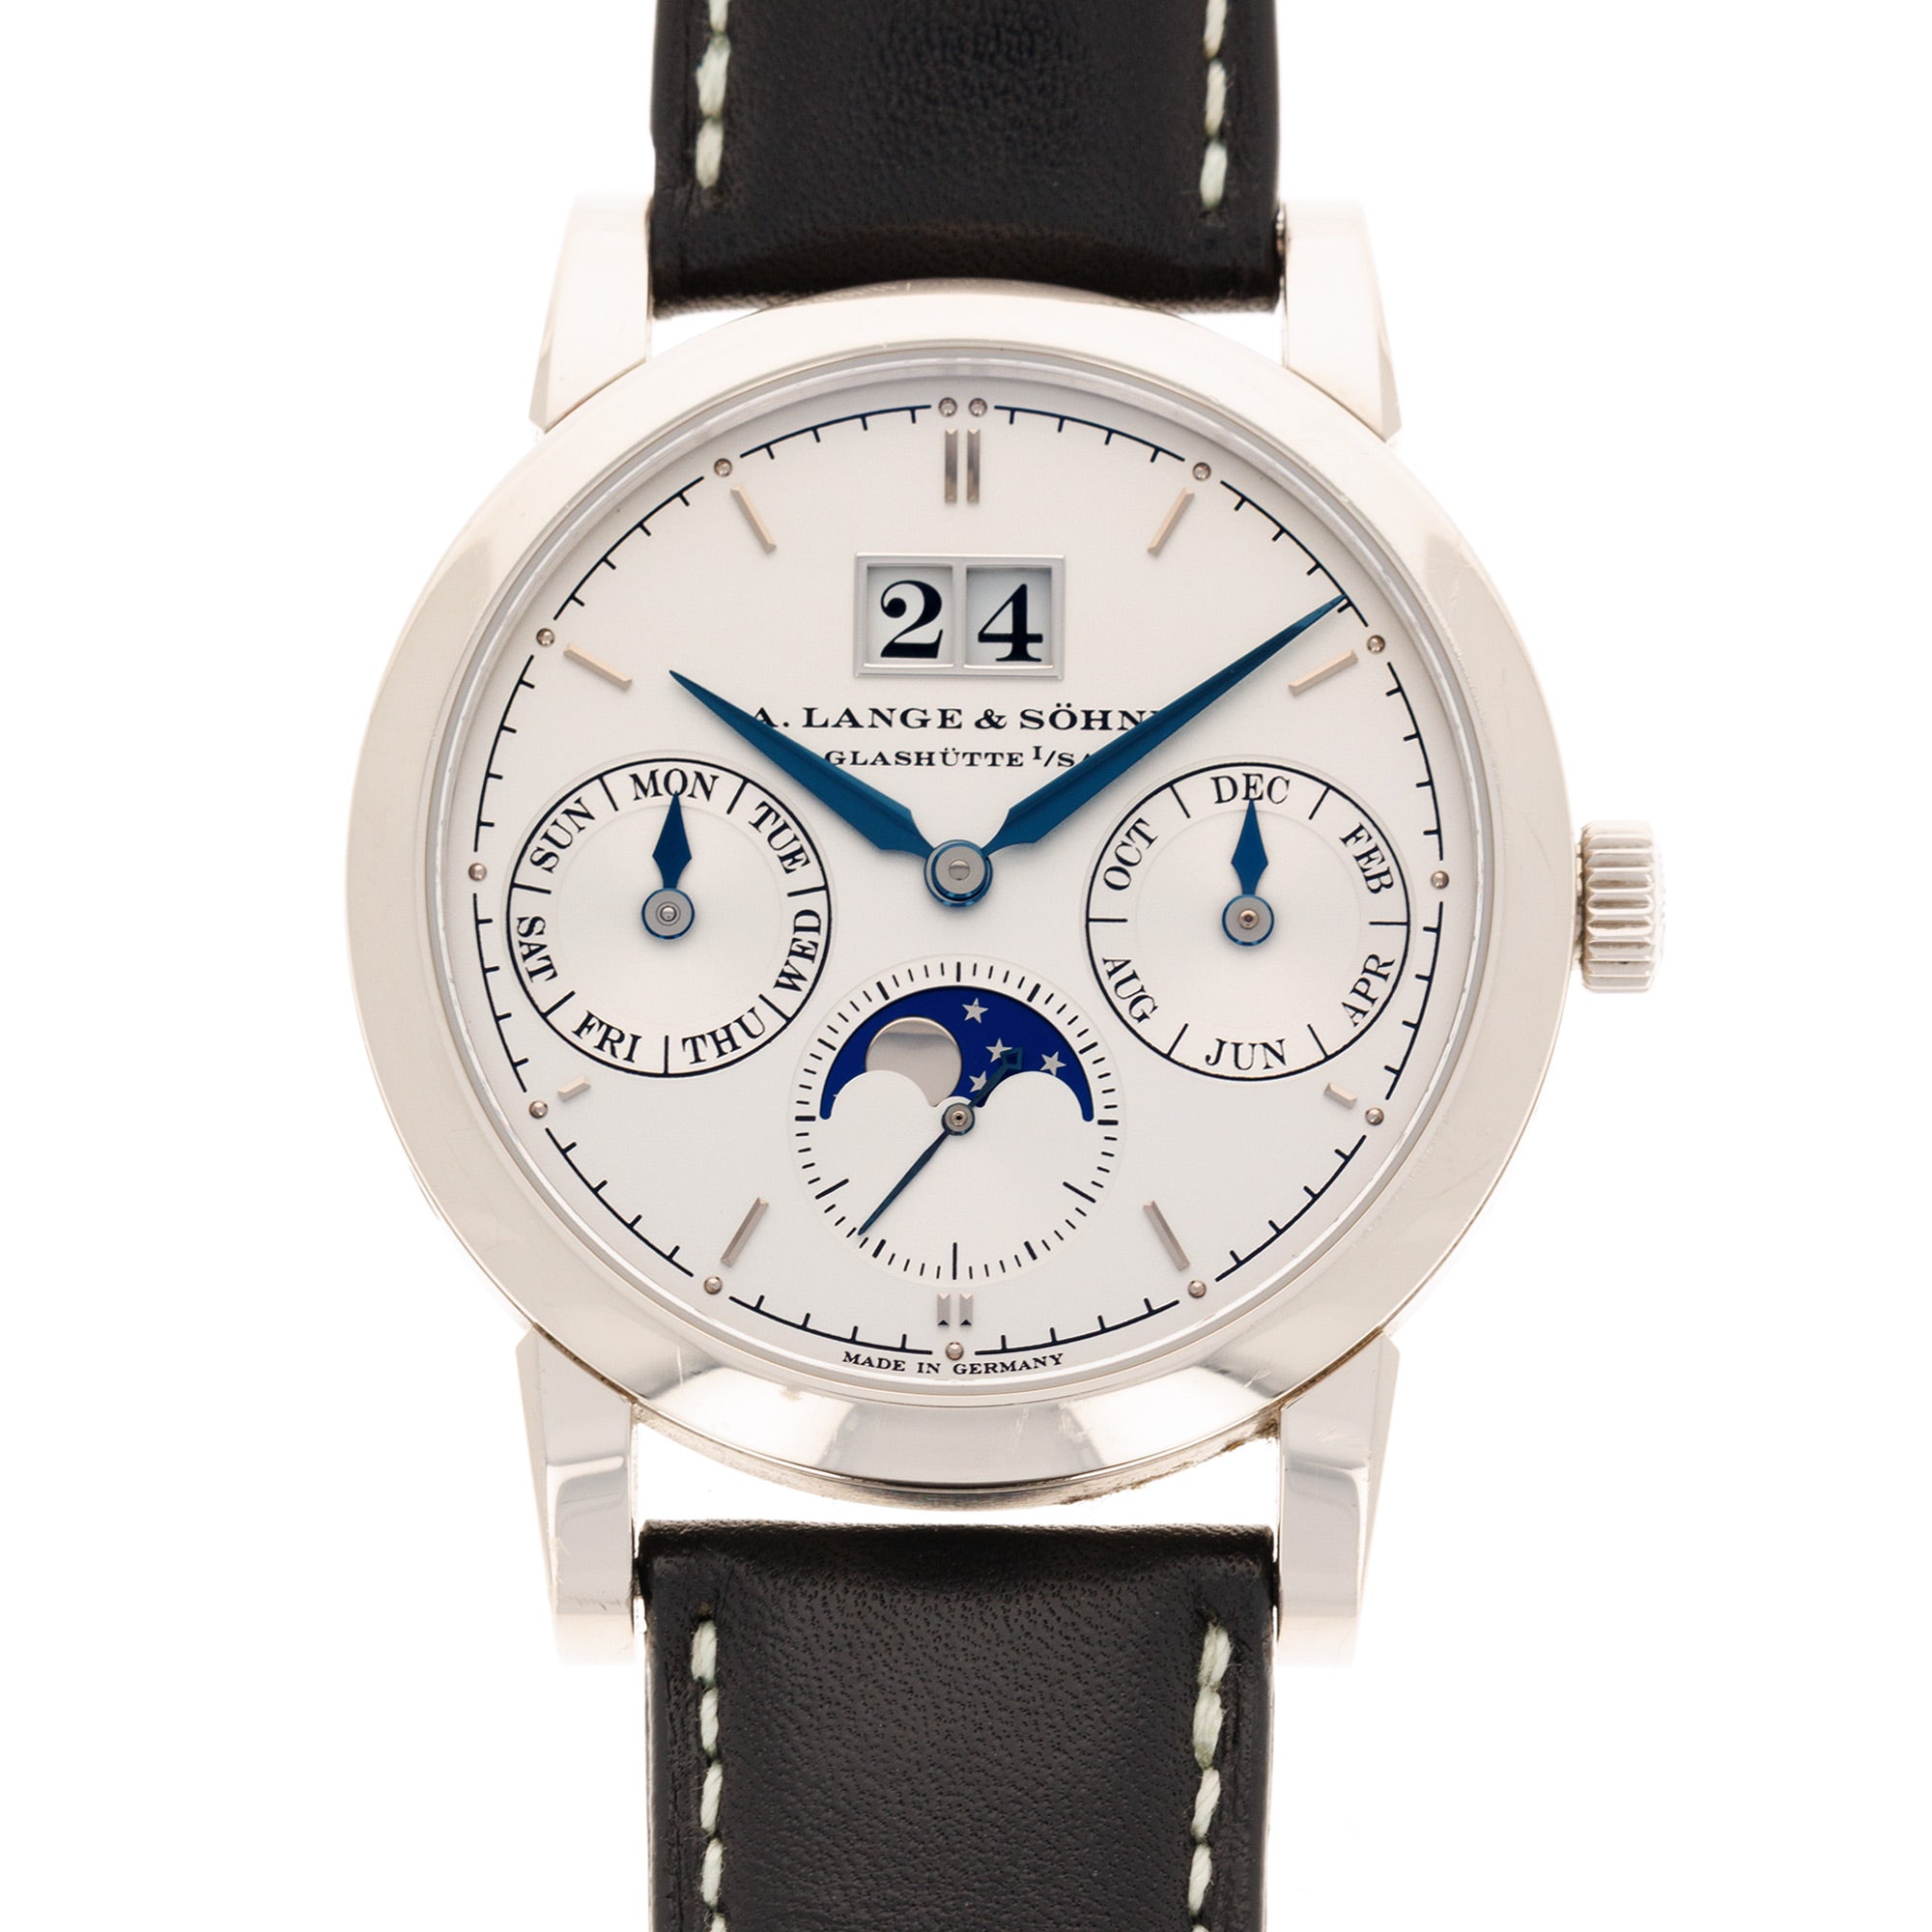 A. Lange & Sohne - A. Lange & Sohne White Gold Annual Calendar Watch Ref. 330.026 - The Keystone Watches